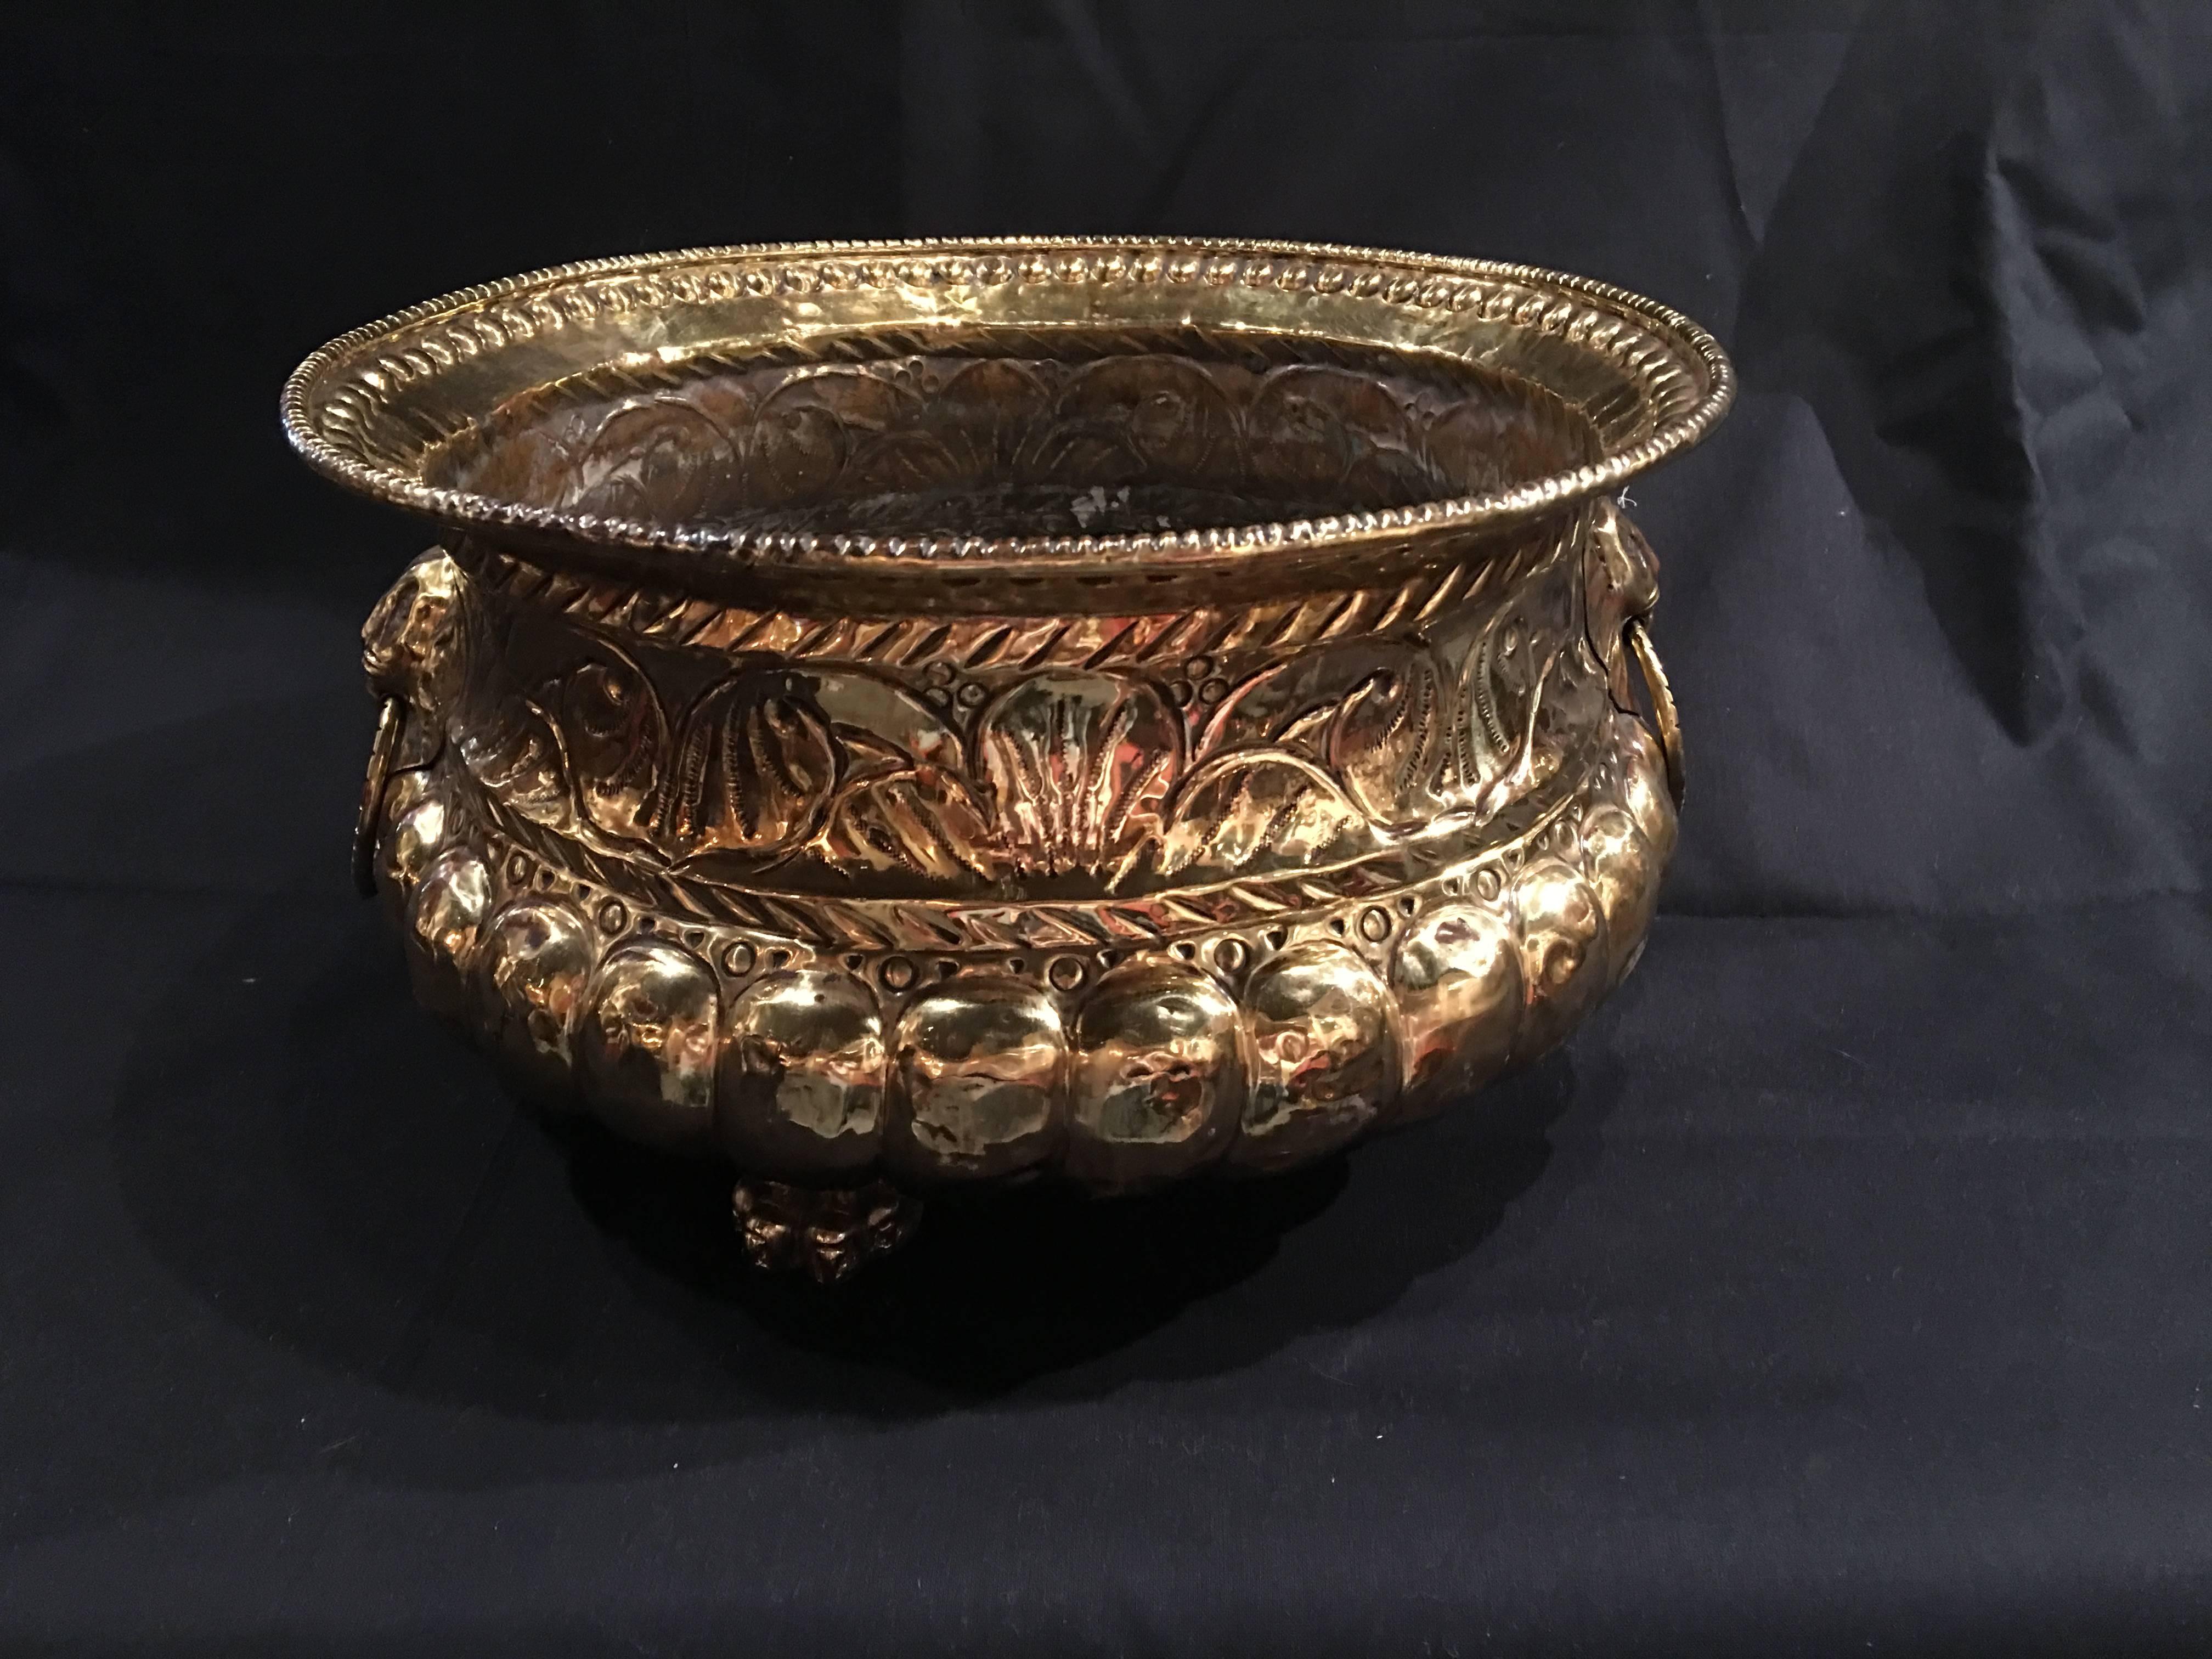 French polished brass round jardiniere or planter on feet, 19th century.